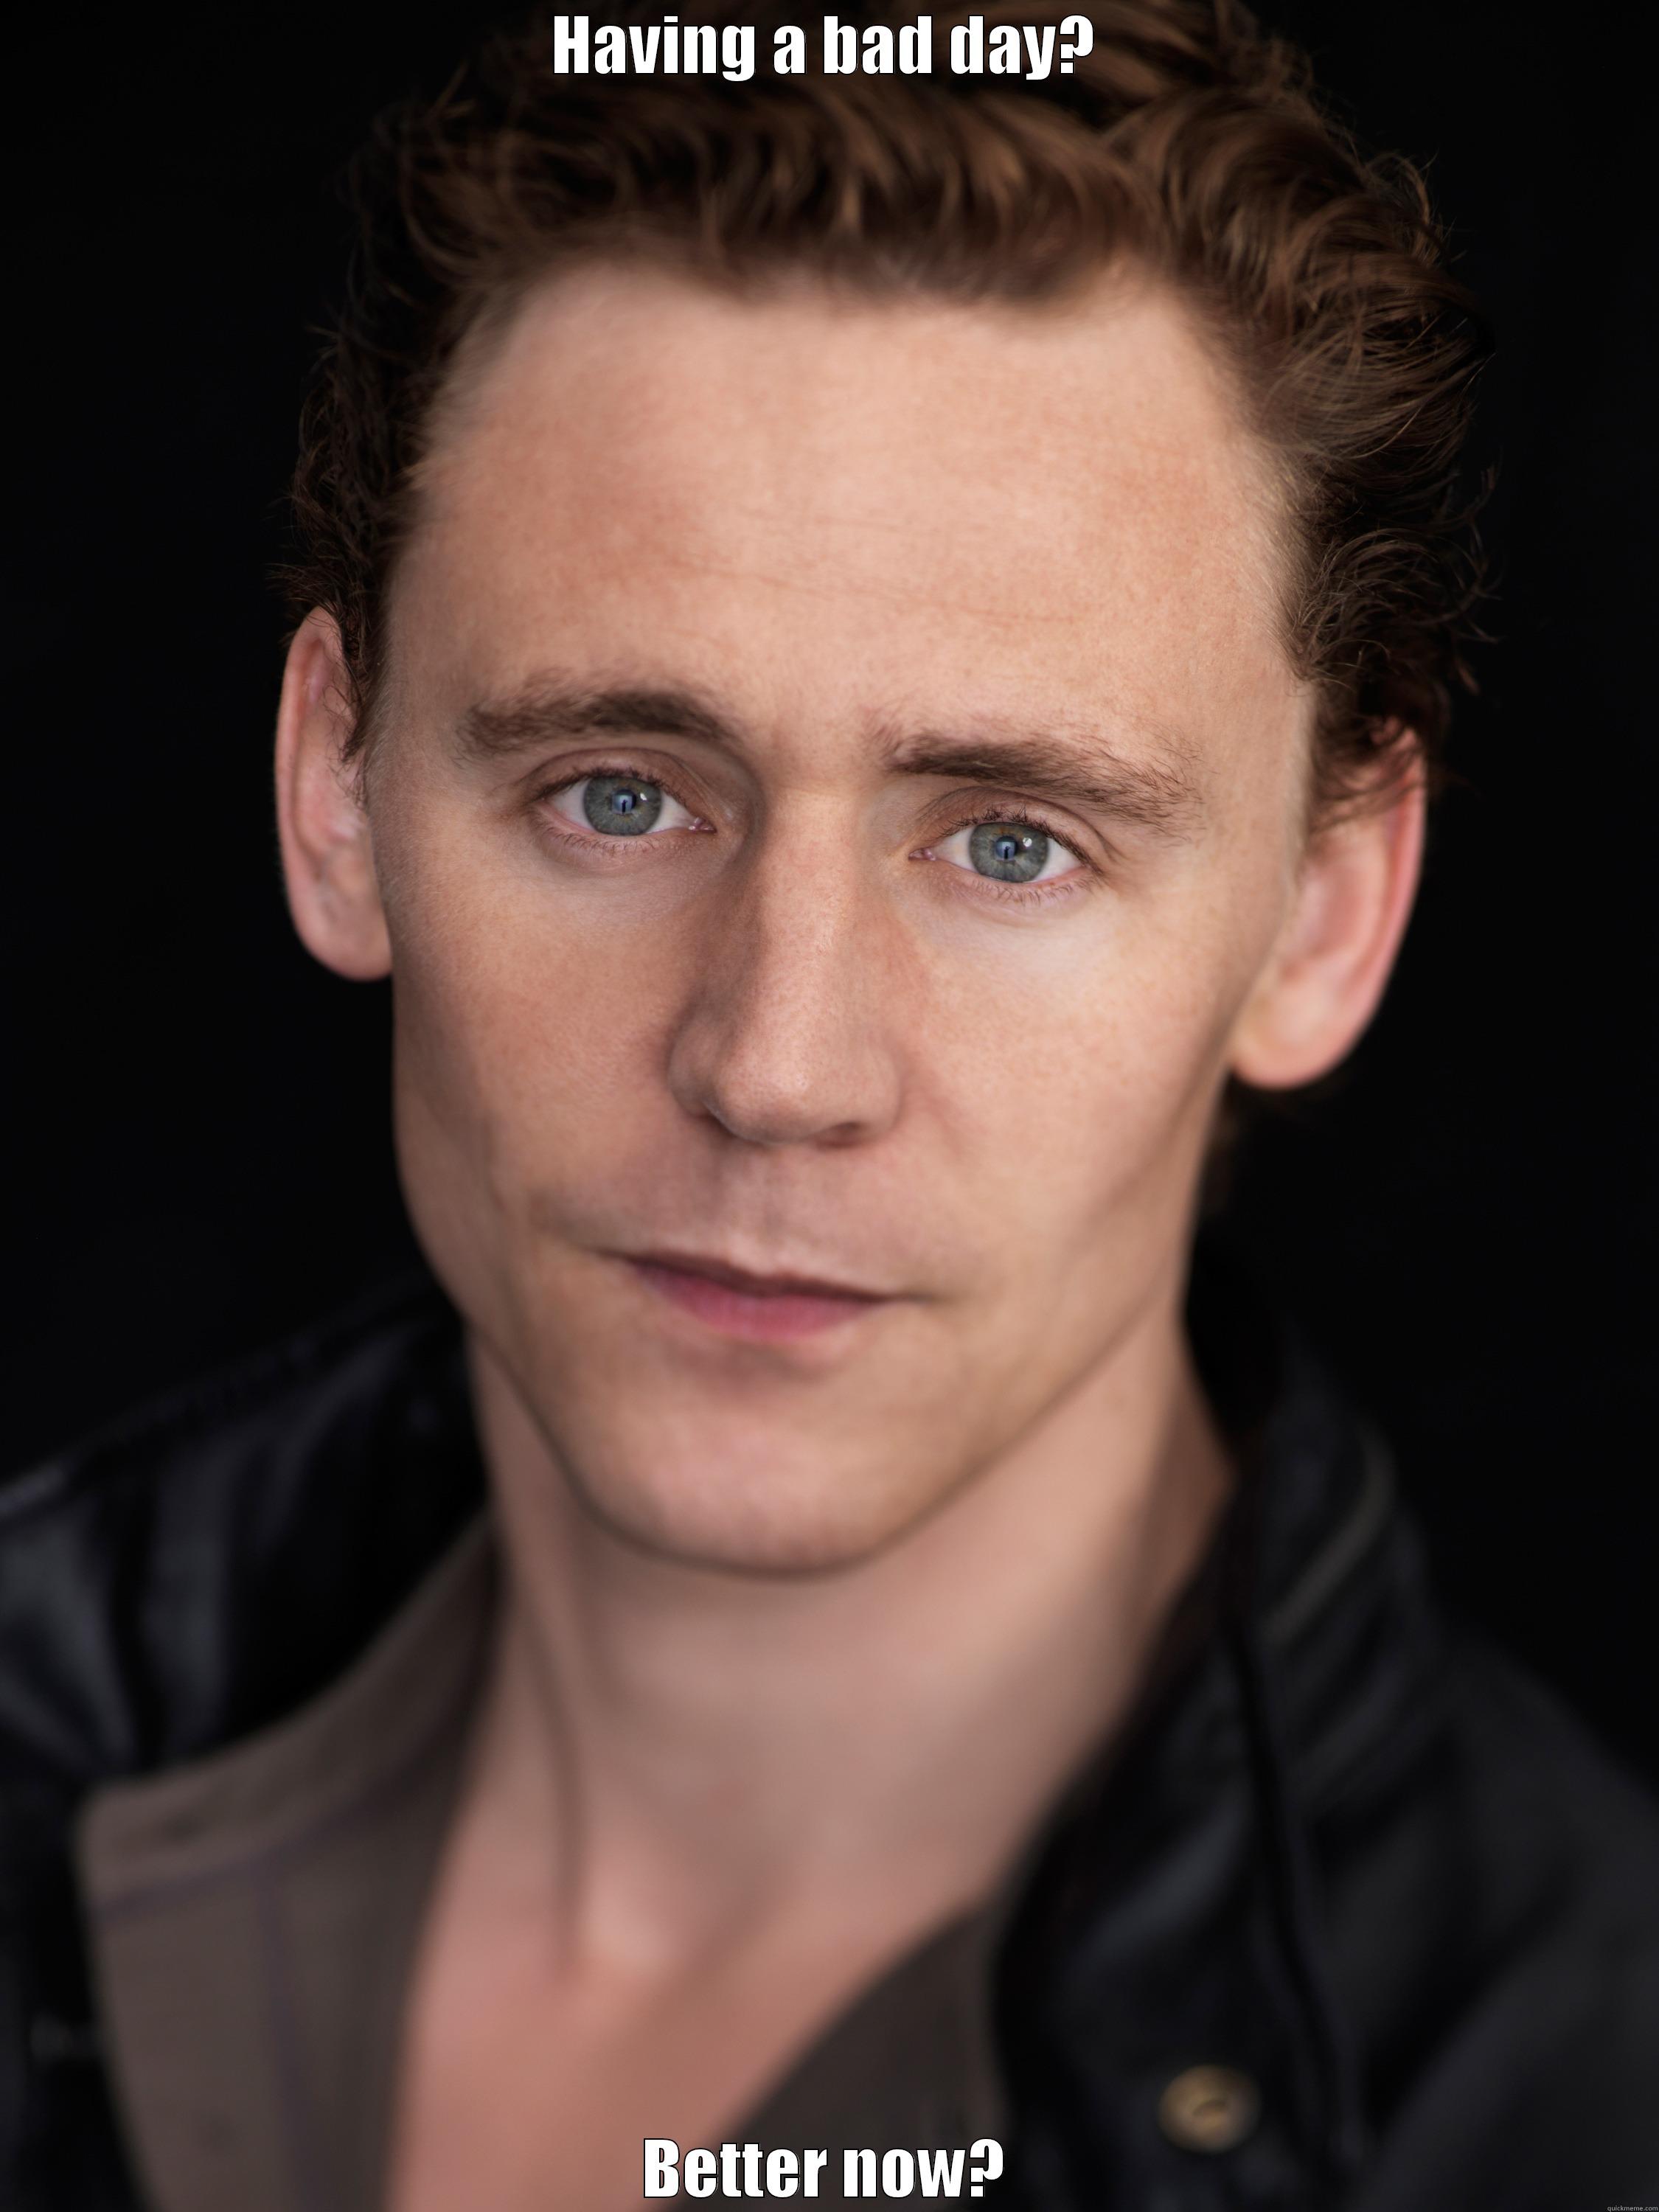 Bad day? Have some Tom Hiddleston - HAVING A BAD DAY? BETTER NOW? Misc